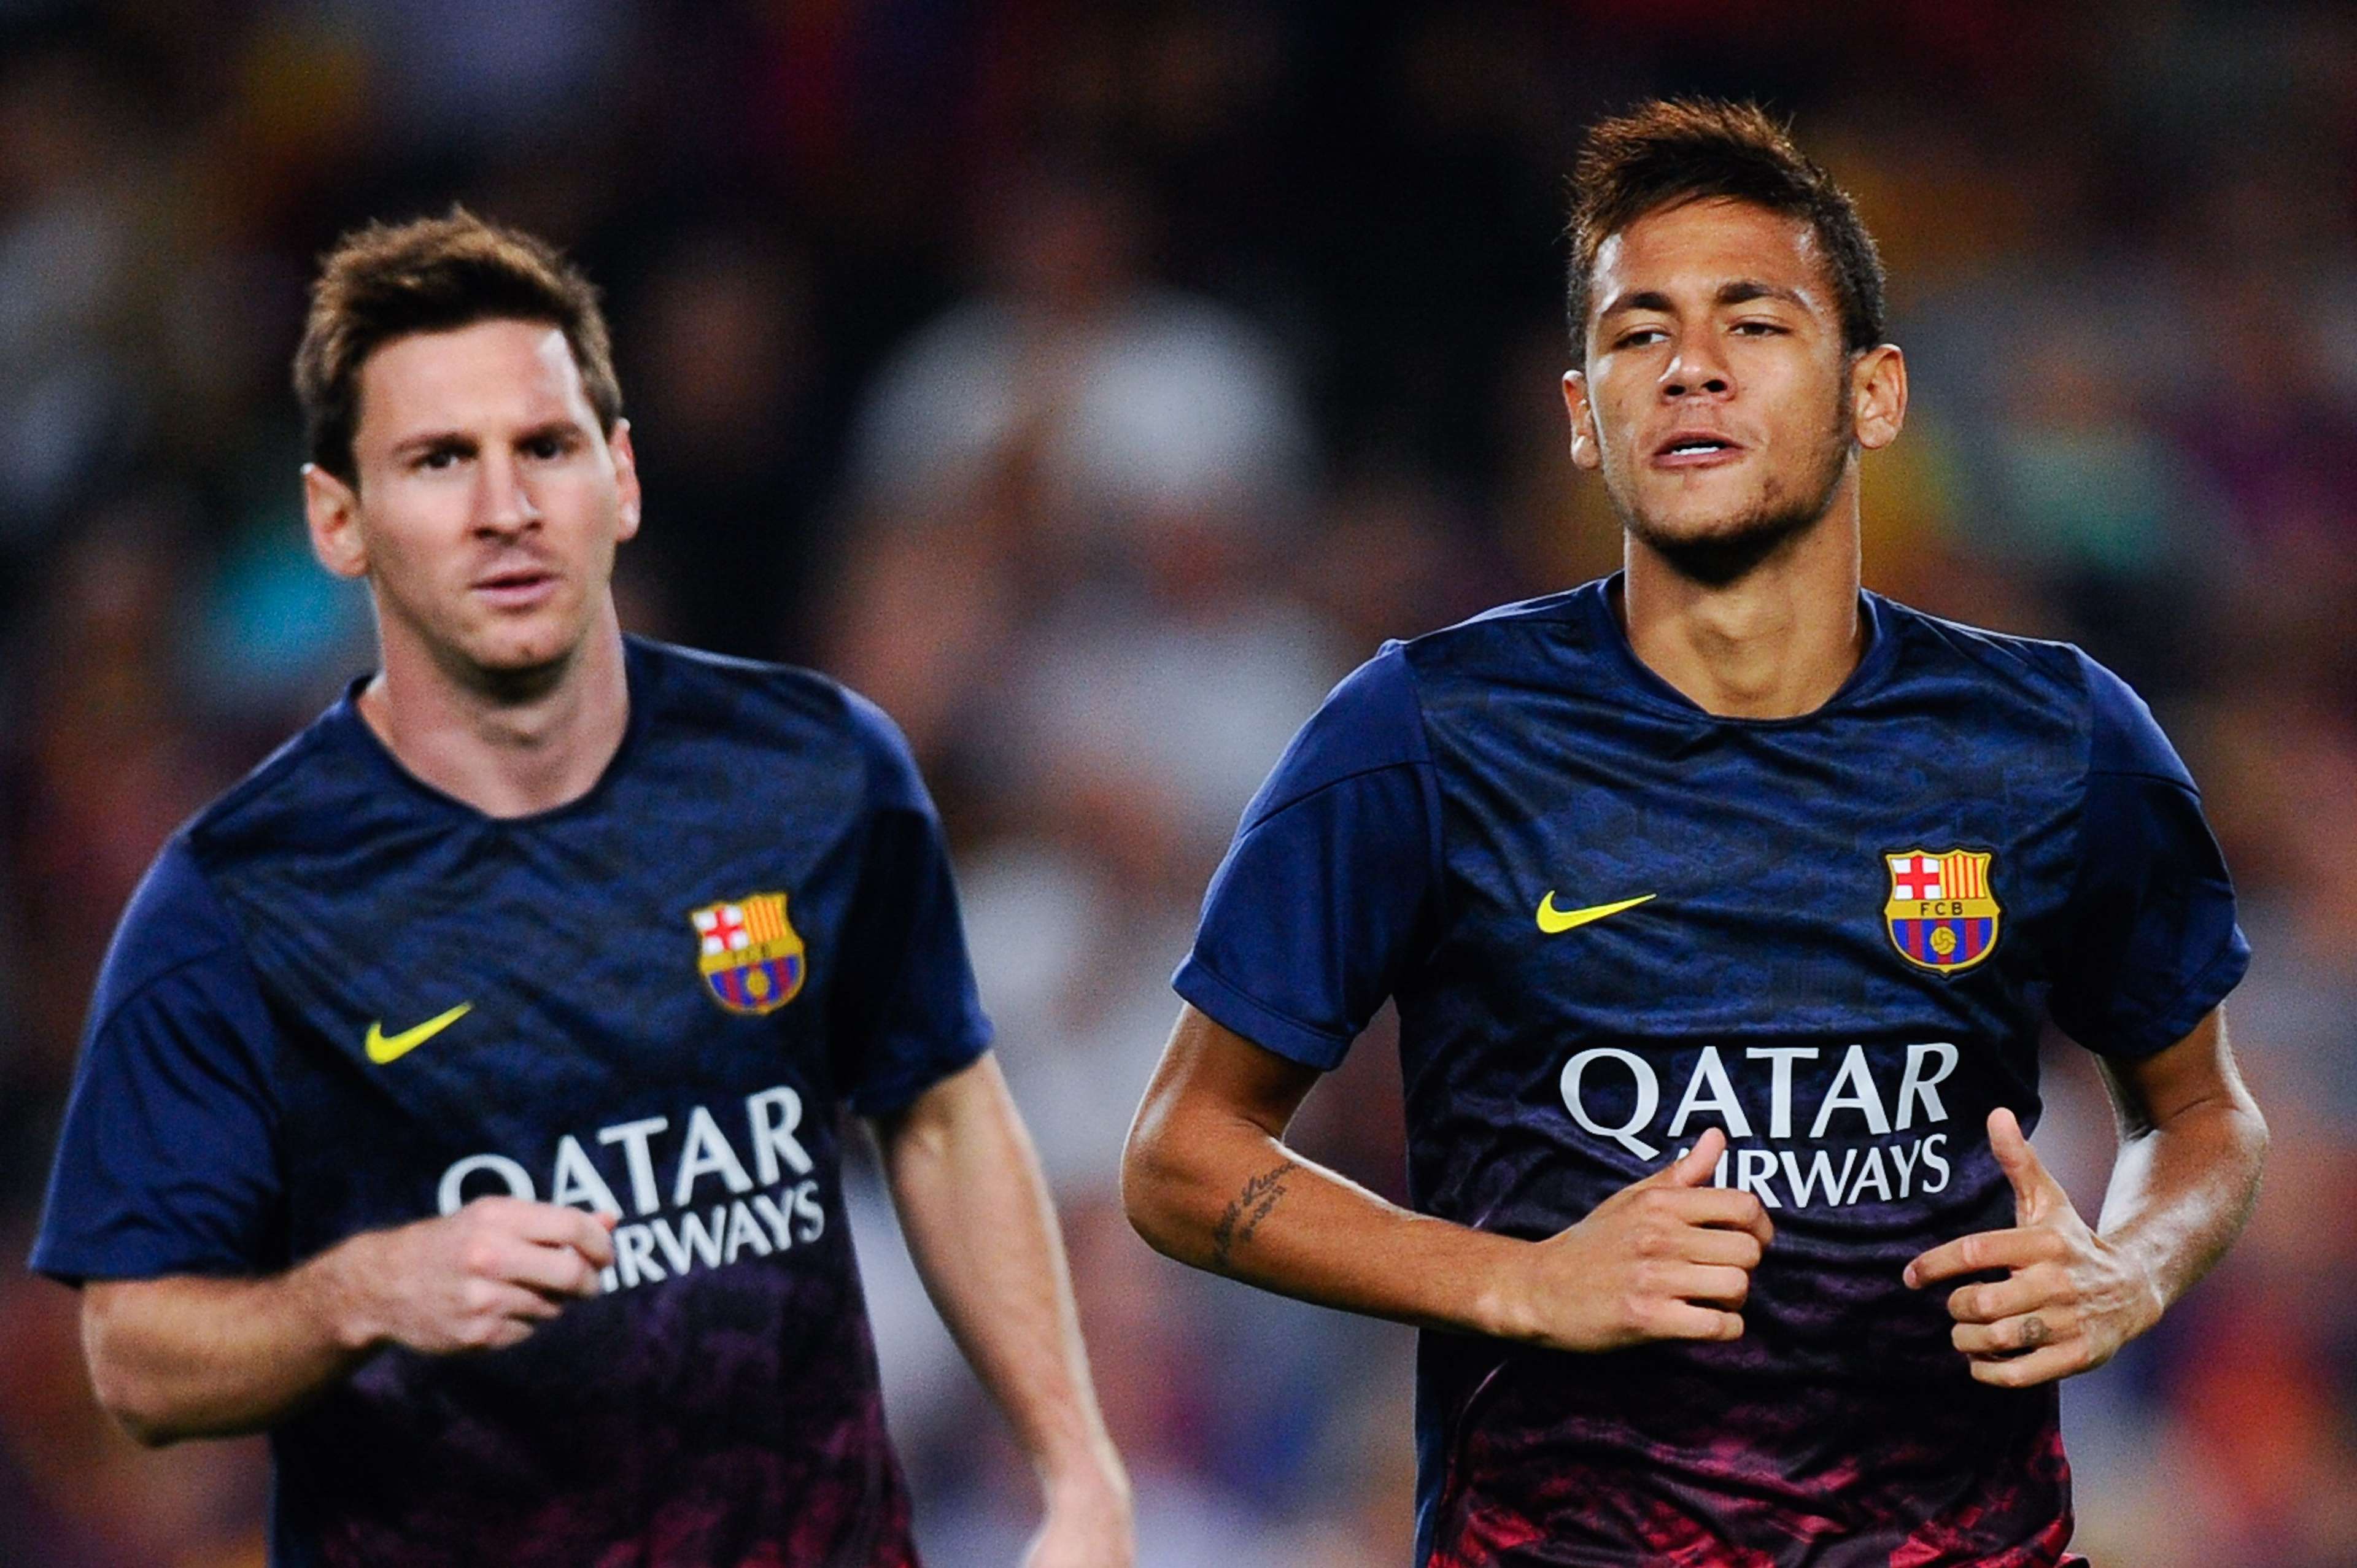 Barcelona players Lionel Messi and Neymar